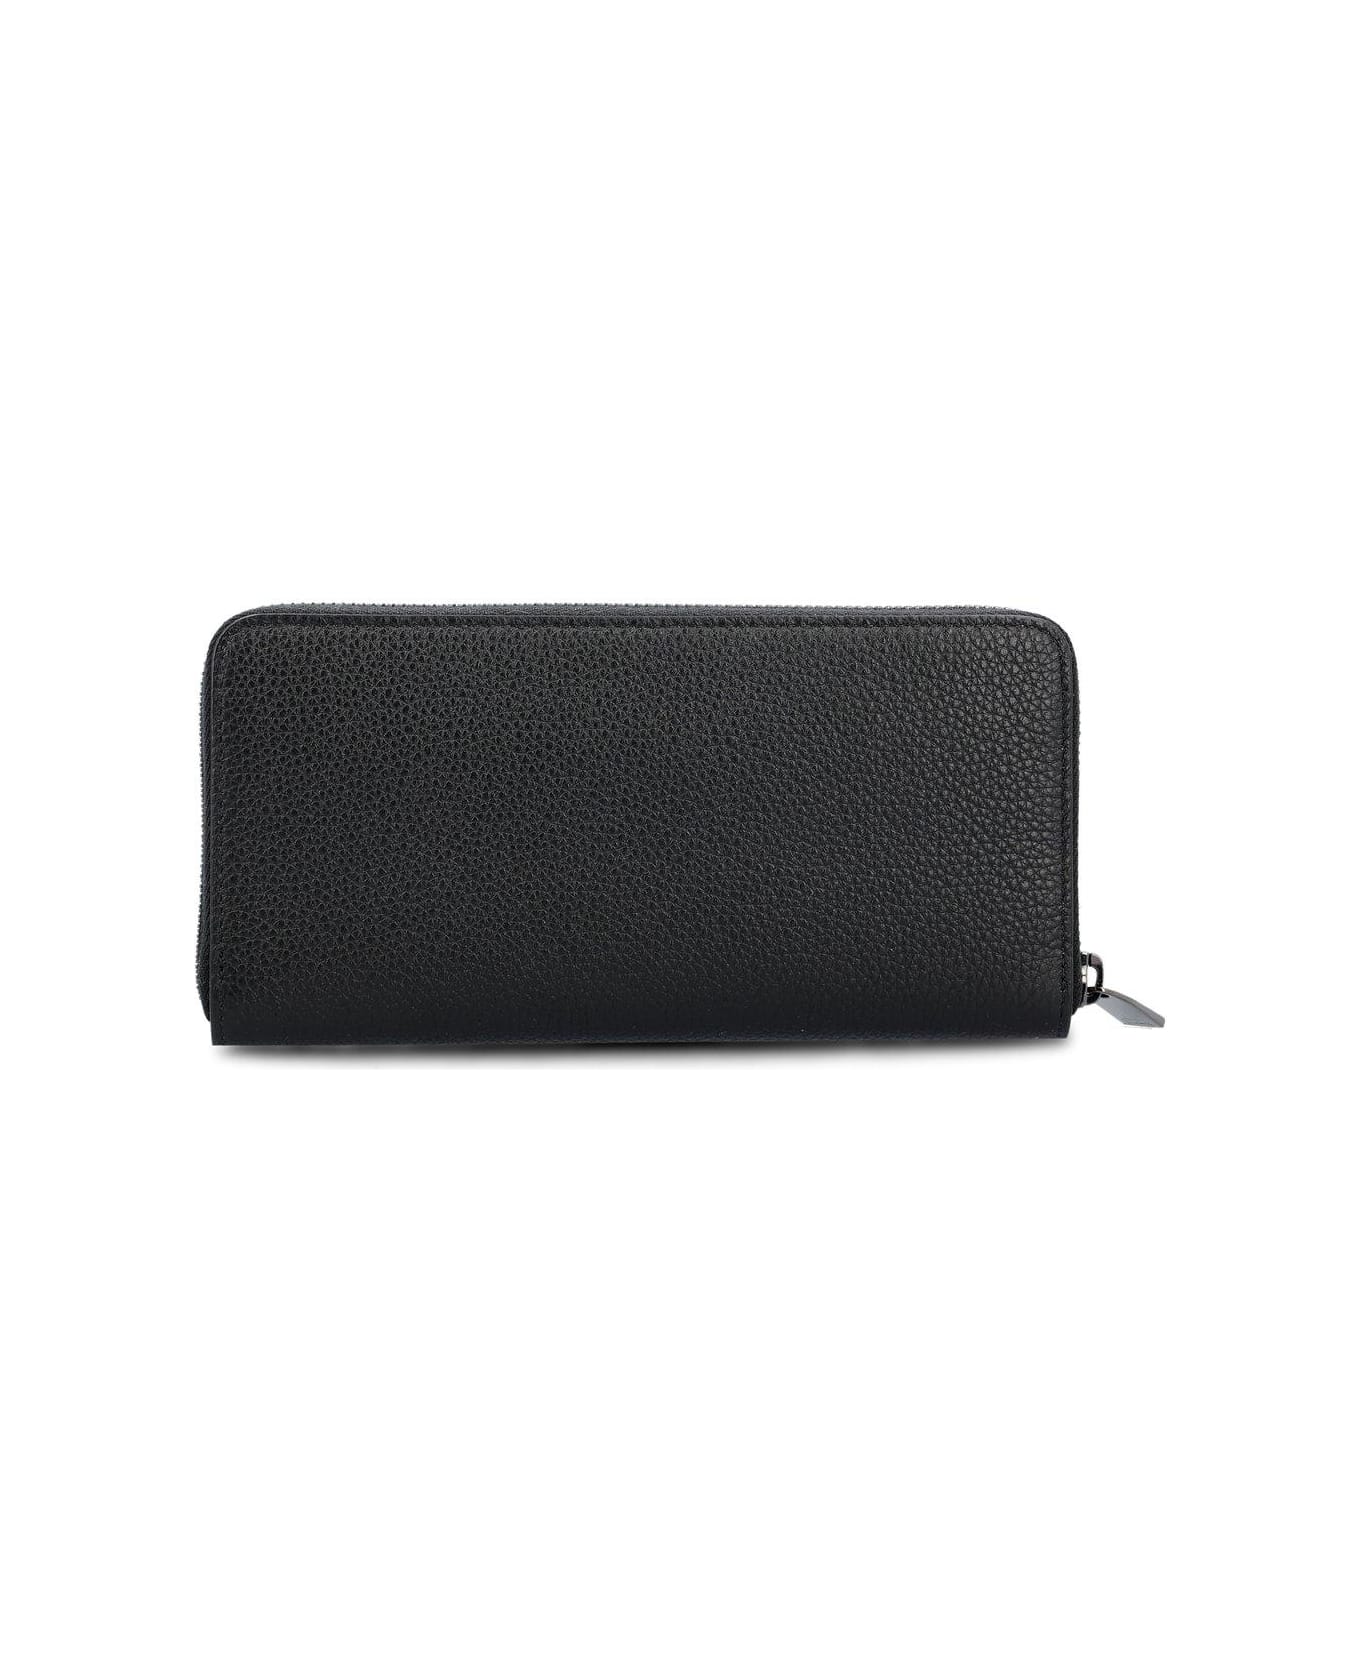 Christian Louboutin By My Side Zip-around Wallet - Black/black